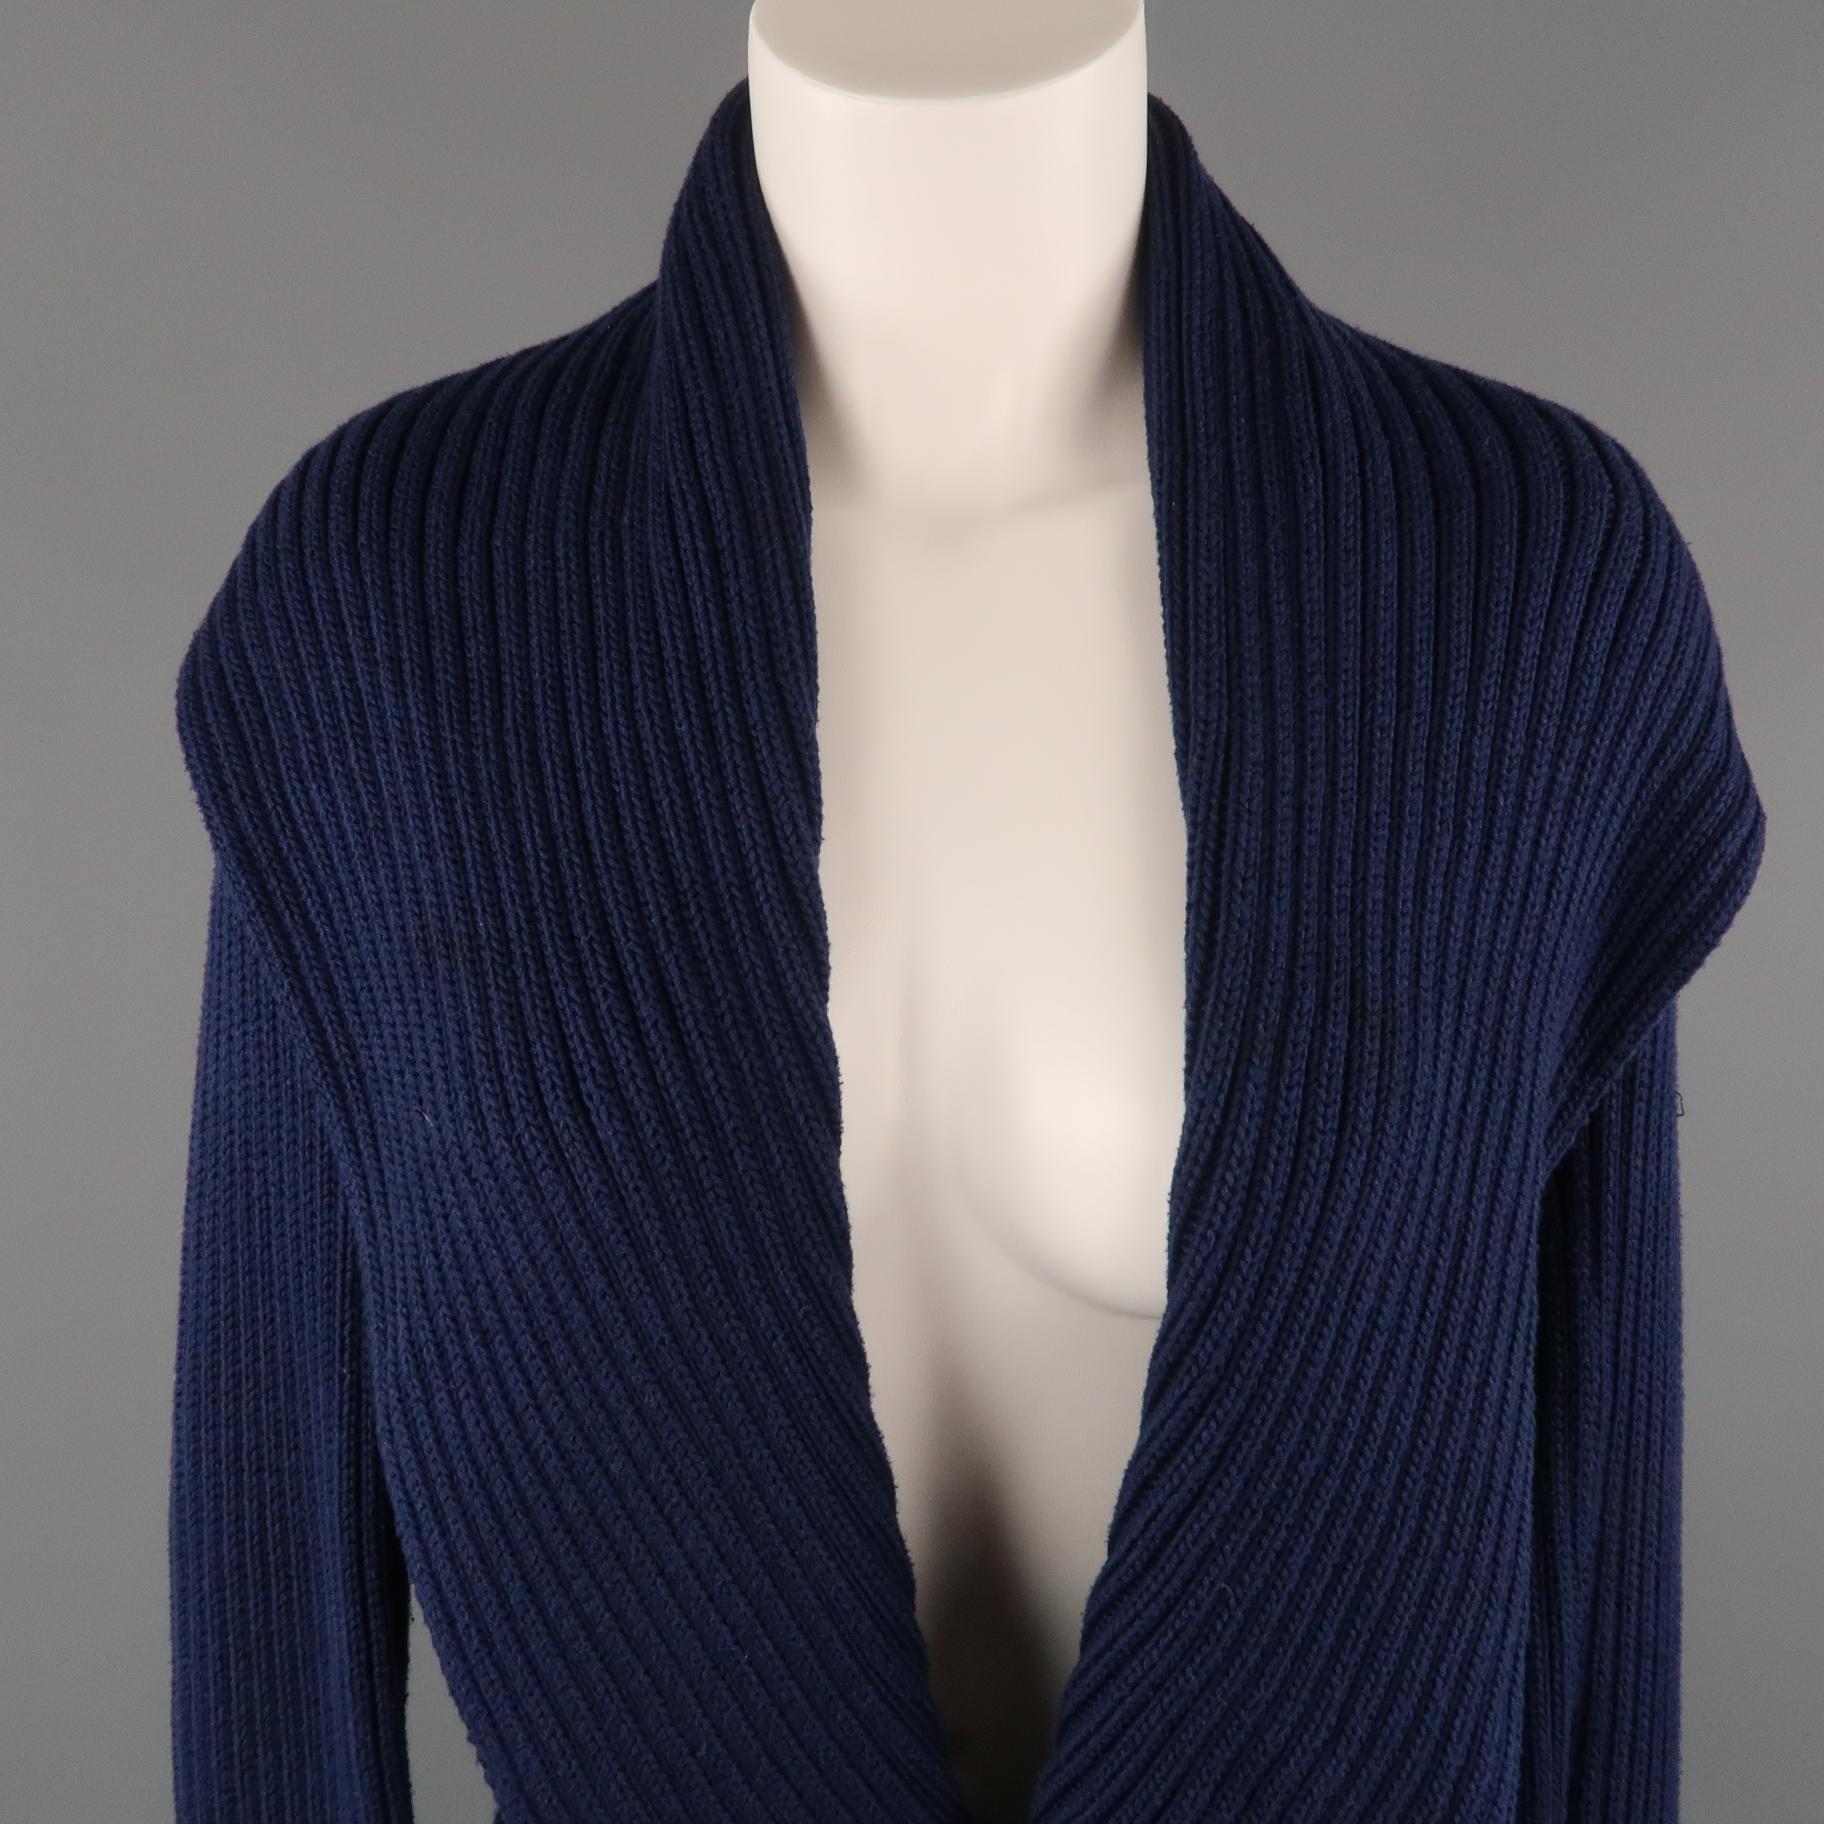 Black Label by RALPH LAUREN open front cardigan comes in blue mercerized cotton ribbed knit with an oversized shawl collar and slim sleeves.
 
Very Good Pre-Owned Condition.
Marked: L
 
Measurements:
 
Shoulder: 16 in.
Bust: 38 in.
Sleeve: 29